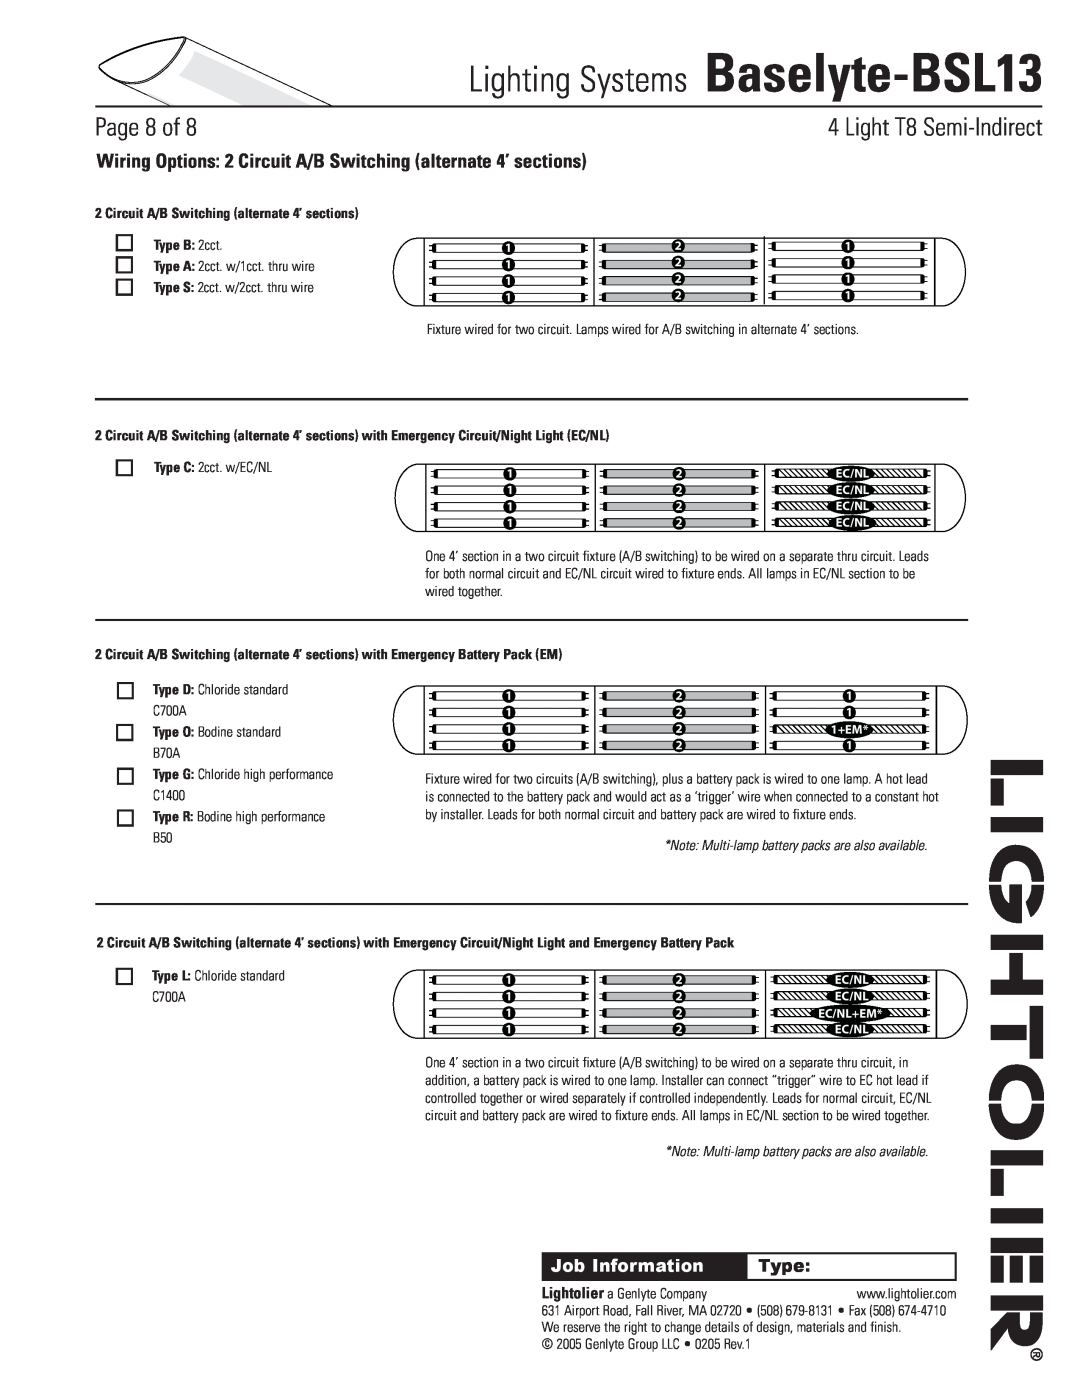 Lightolier Baselyte-BSL13 Circuit A/B Switching alternate 4’ sections, Type B 2cct, Type O: Bodine standard B70A, Page of 